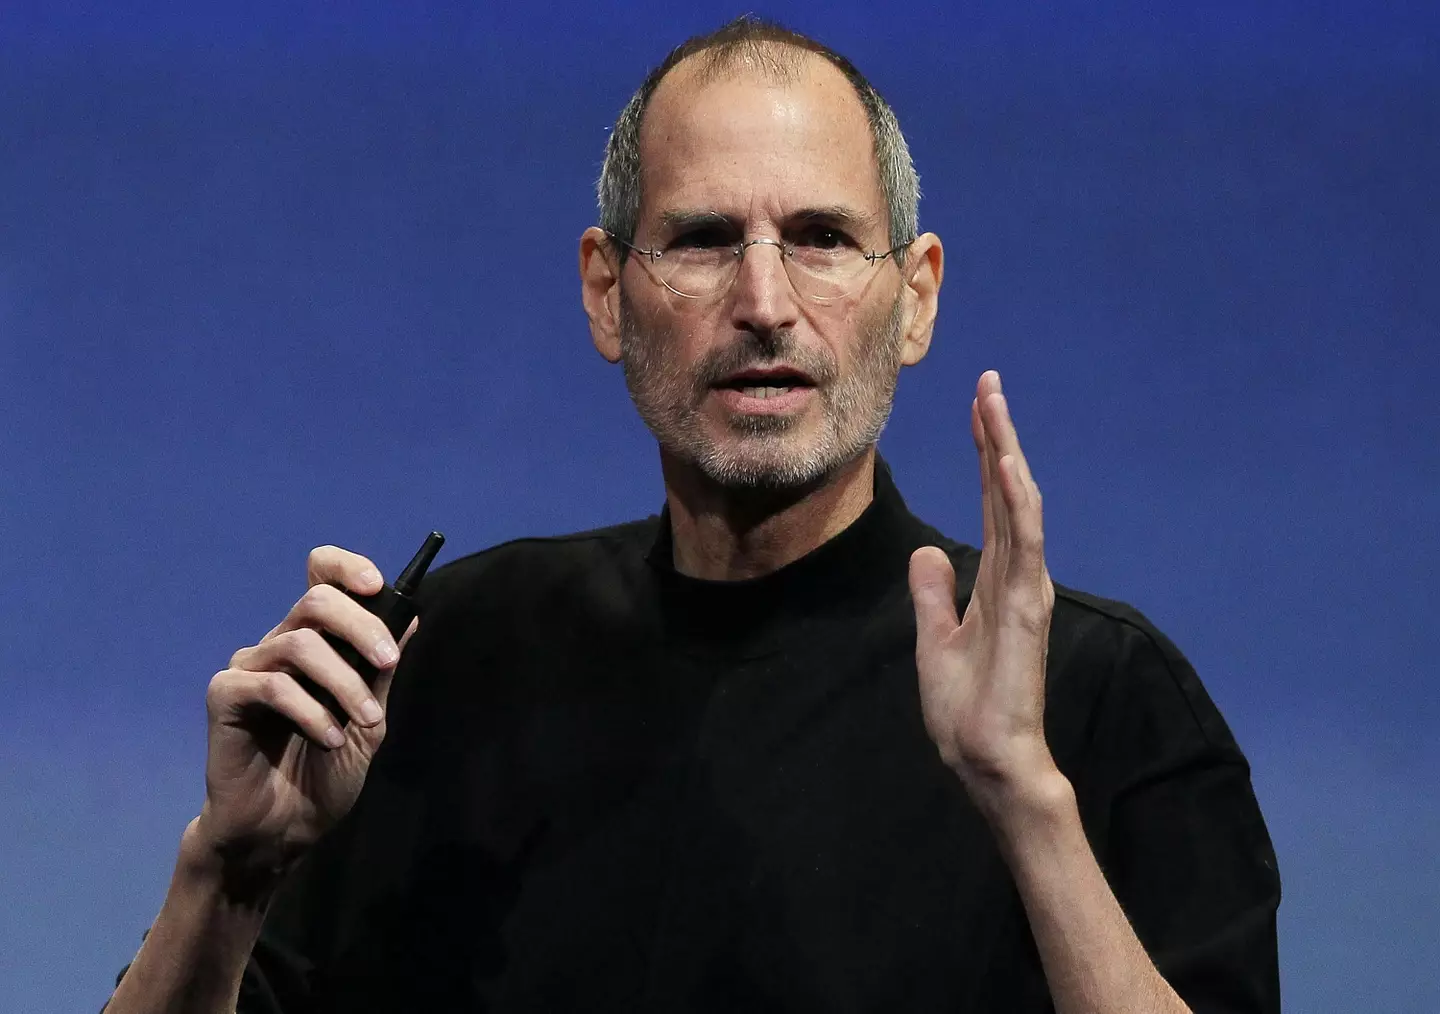 Steve Jobs apparently asked this one question over and over again.